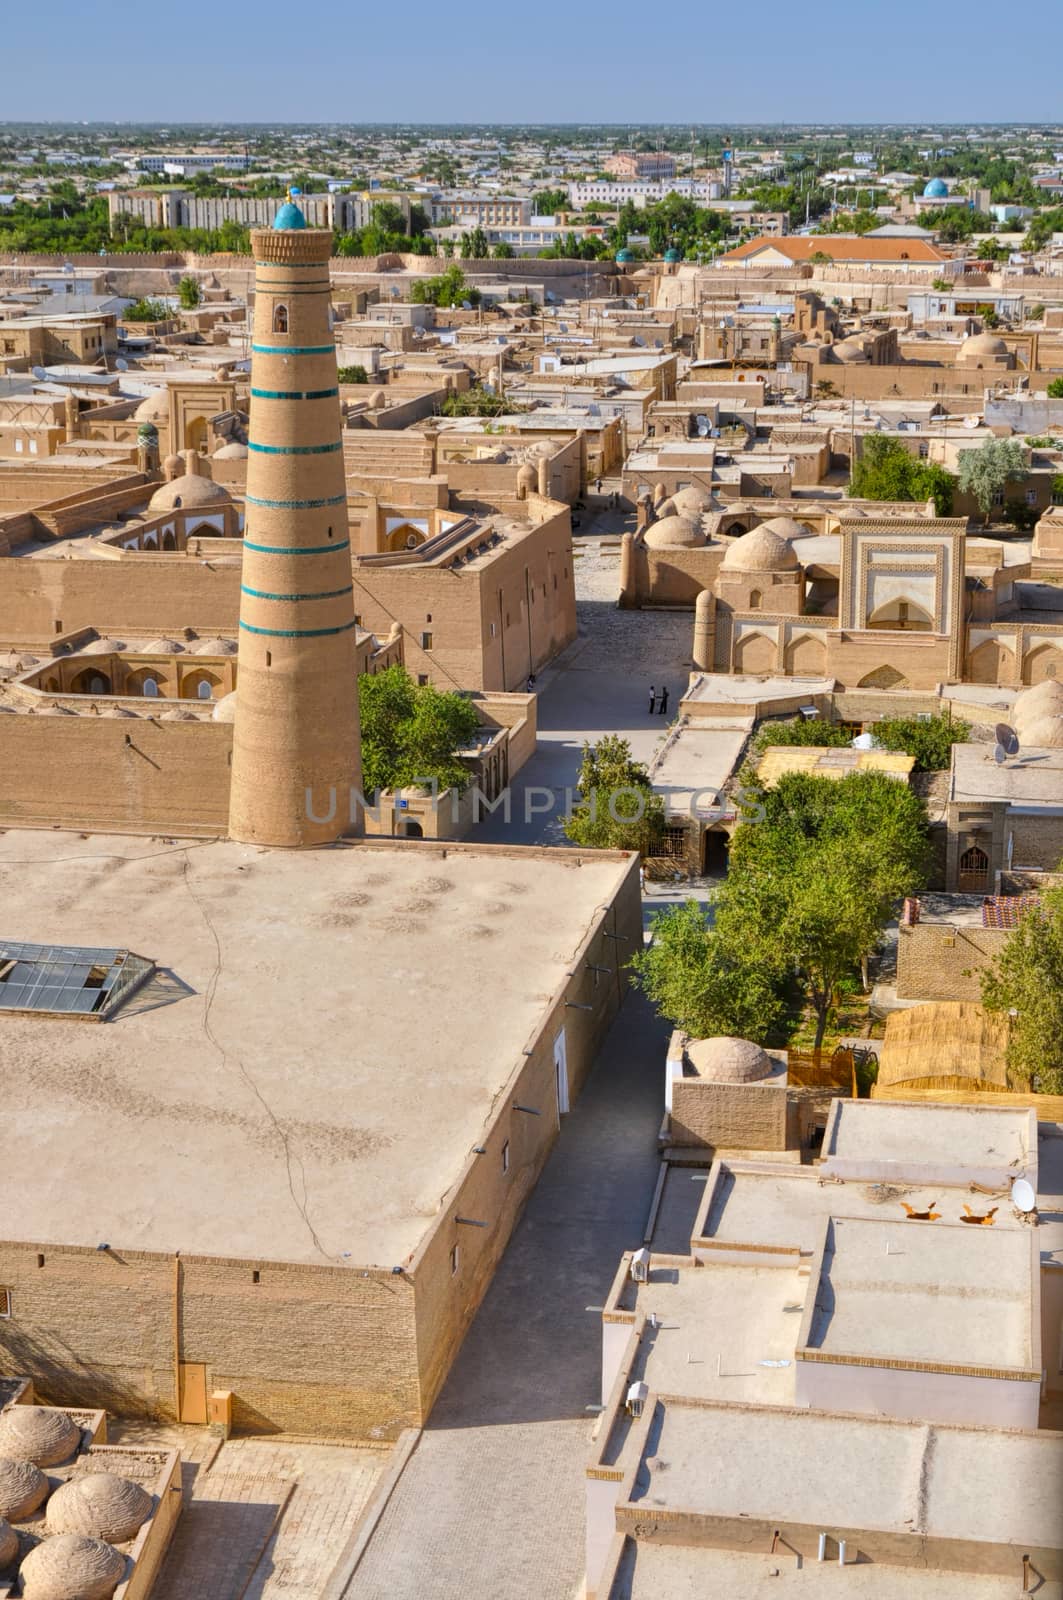 Scenic aerial view of streets in old town in Khiva, Uzbekistan with large mosque